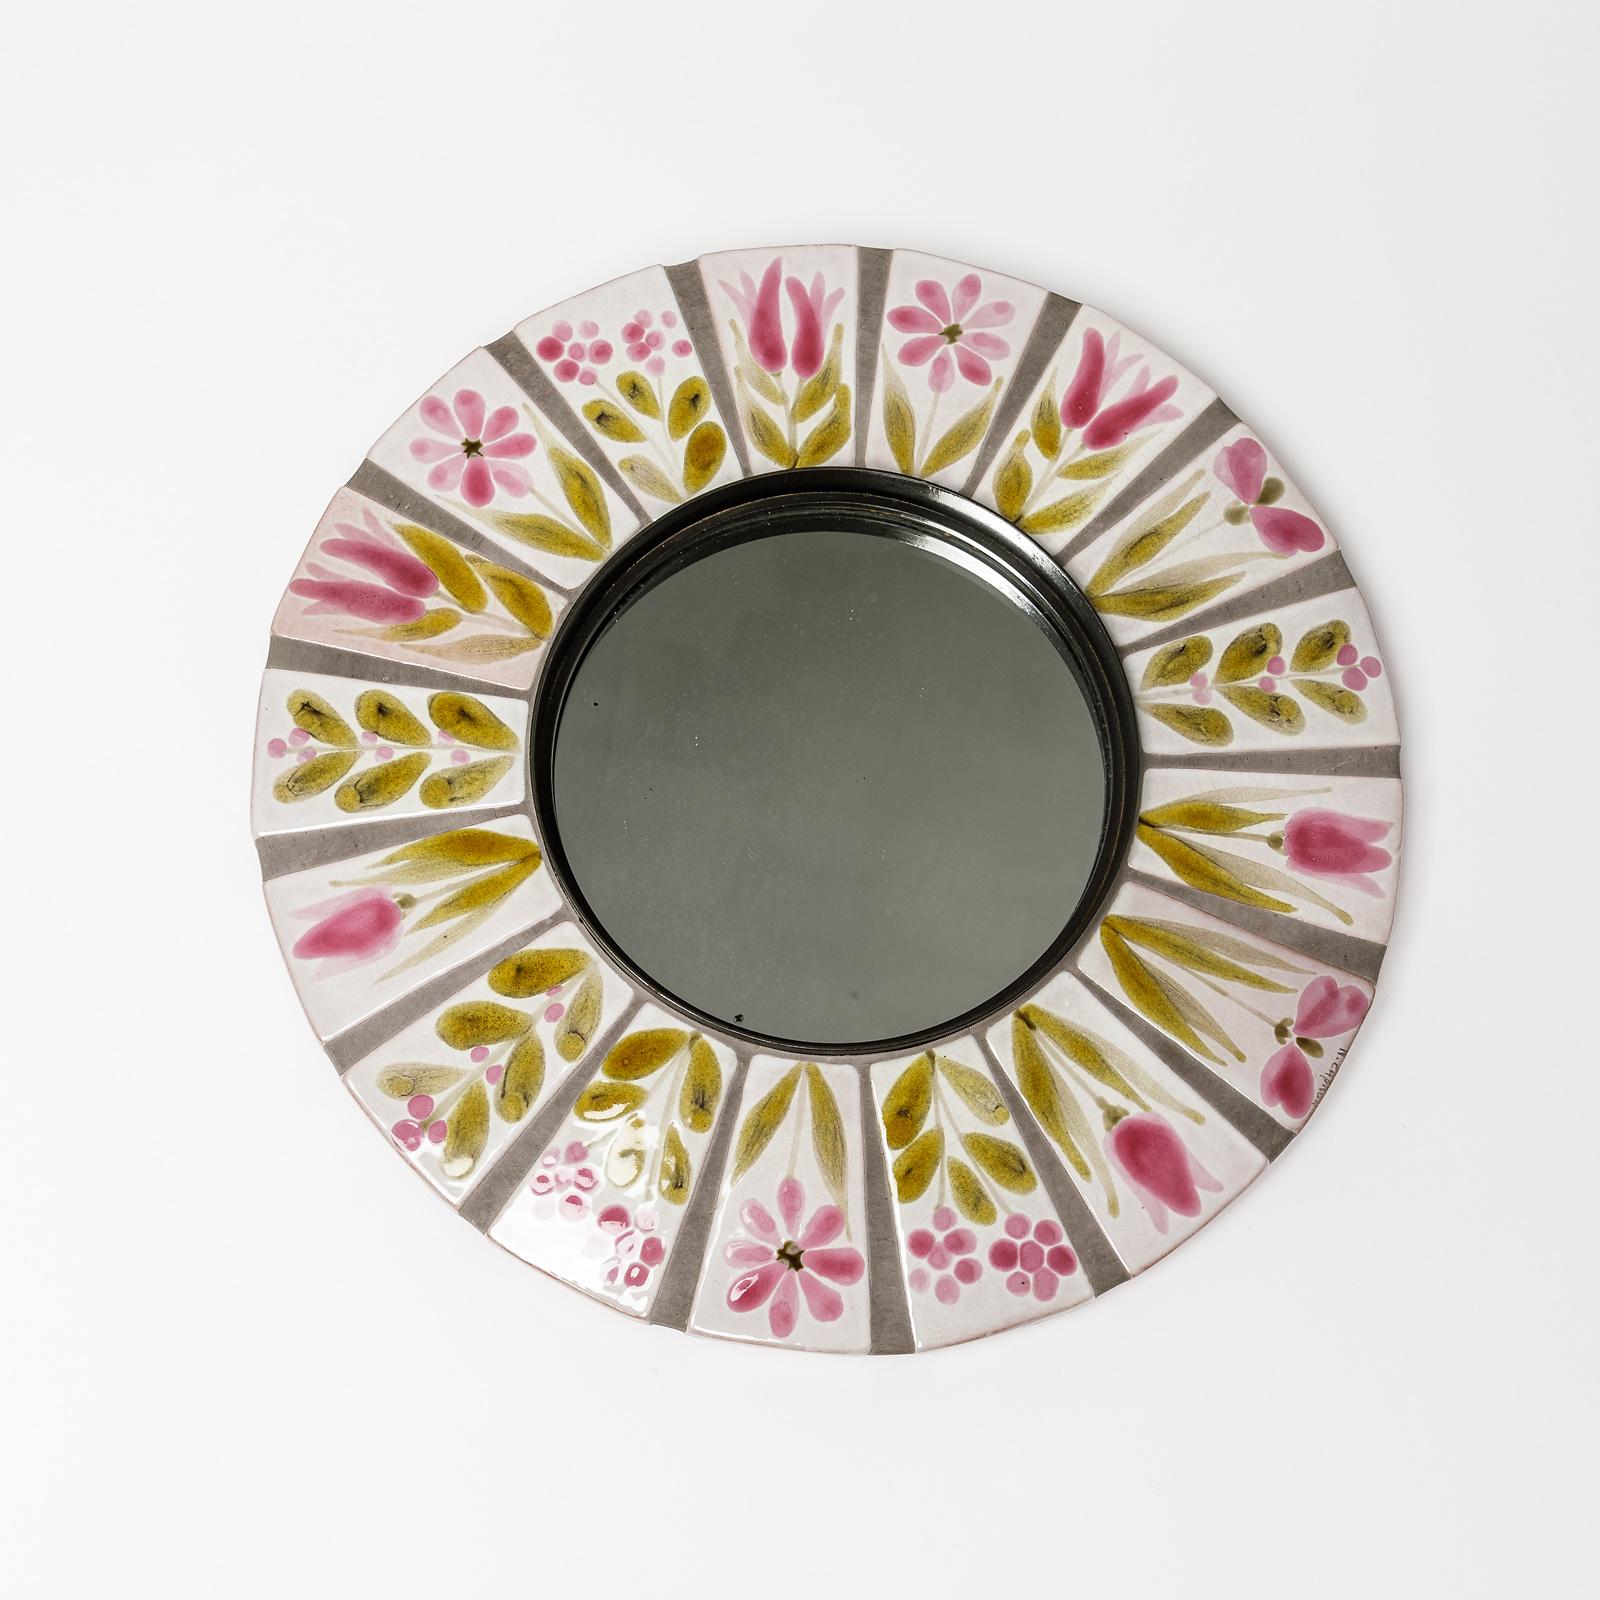 A ceramic mirror with flowers decoration by Roger Capron.
Perfect original conditions.
Signed 